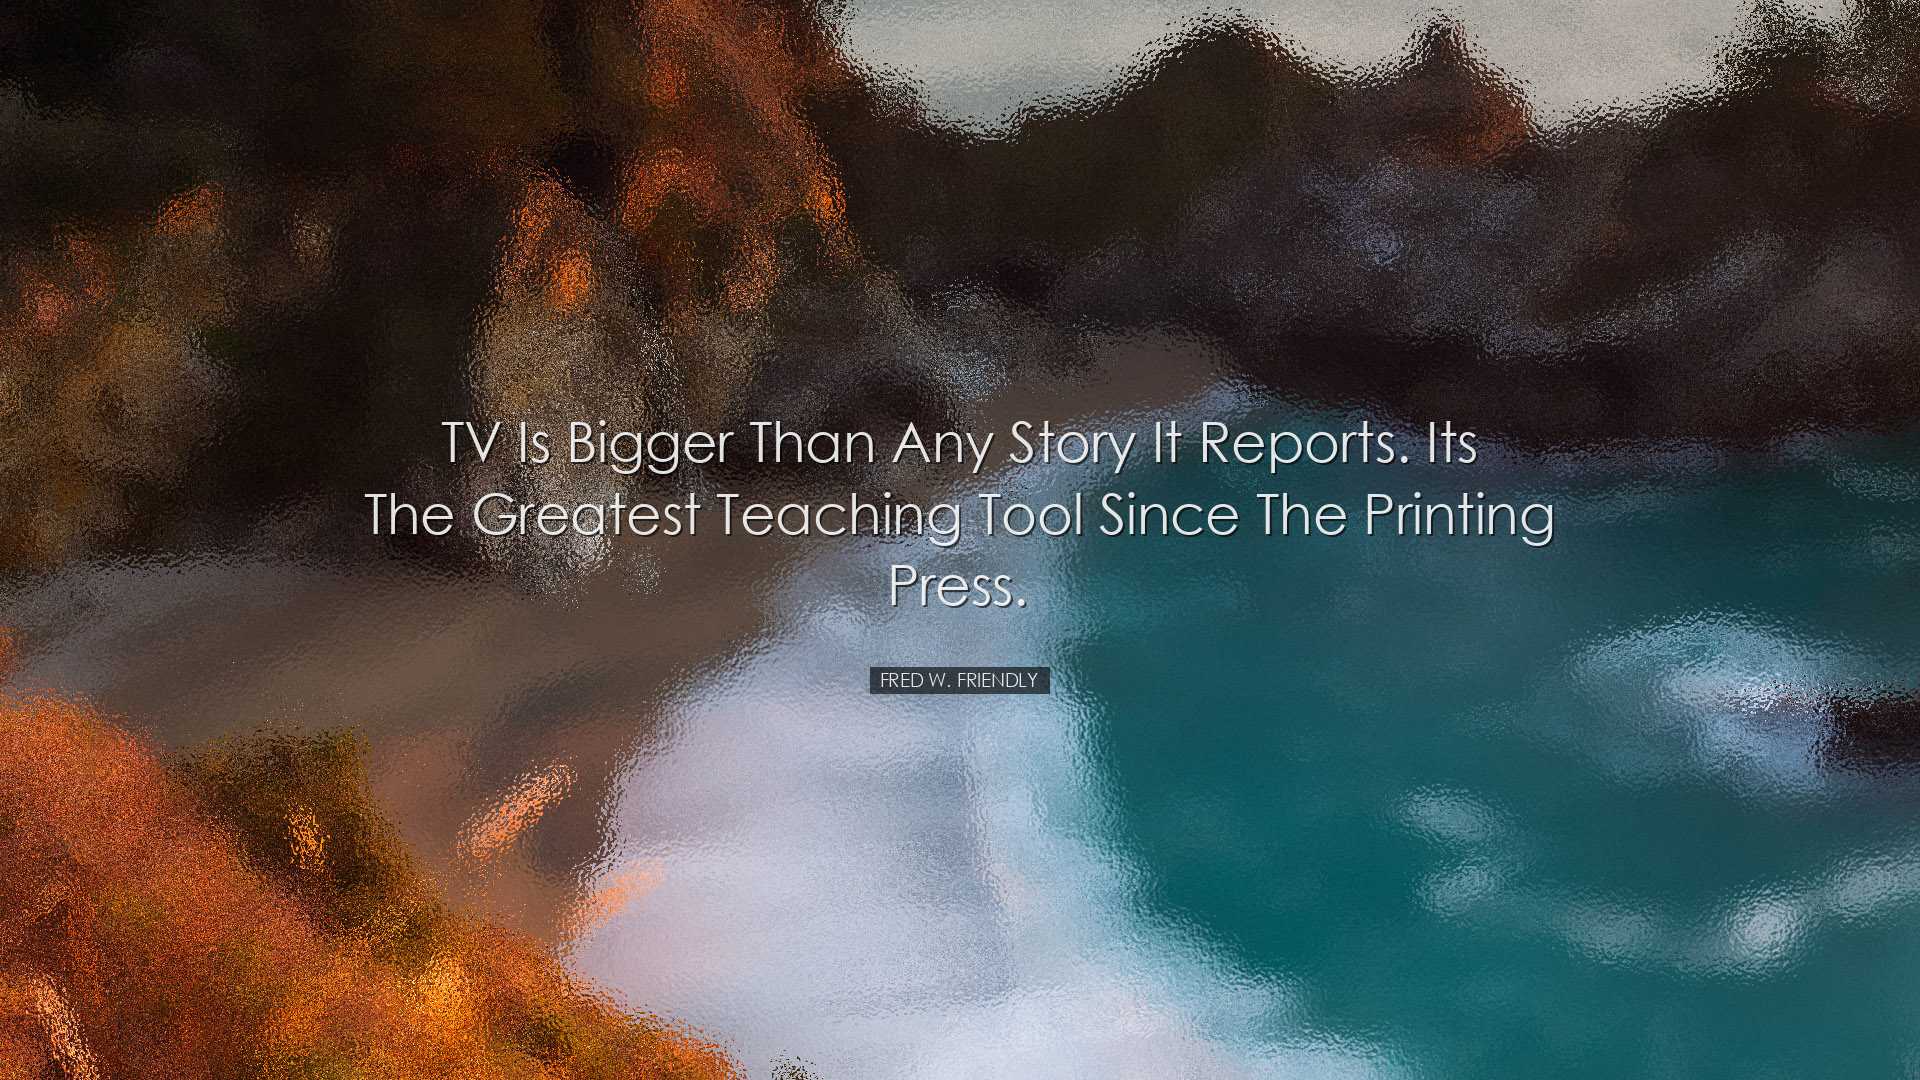 TV is bigger than any story it reports. Its the greatest teaching